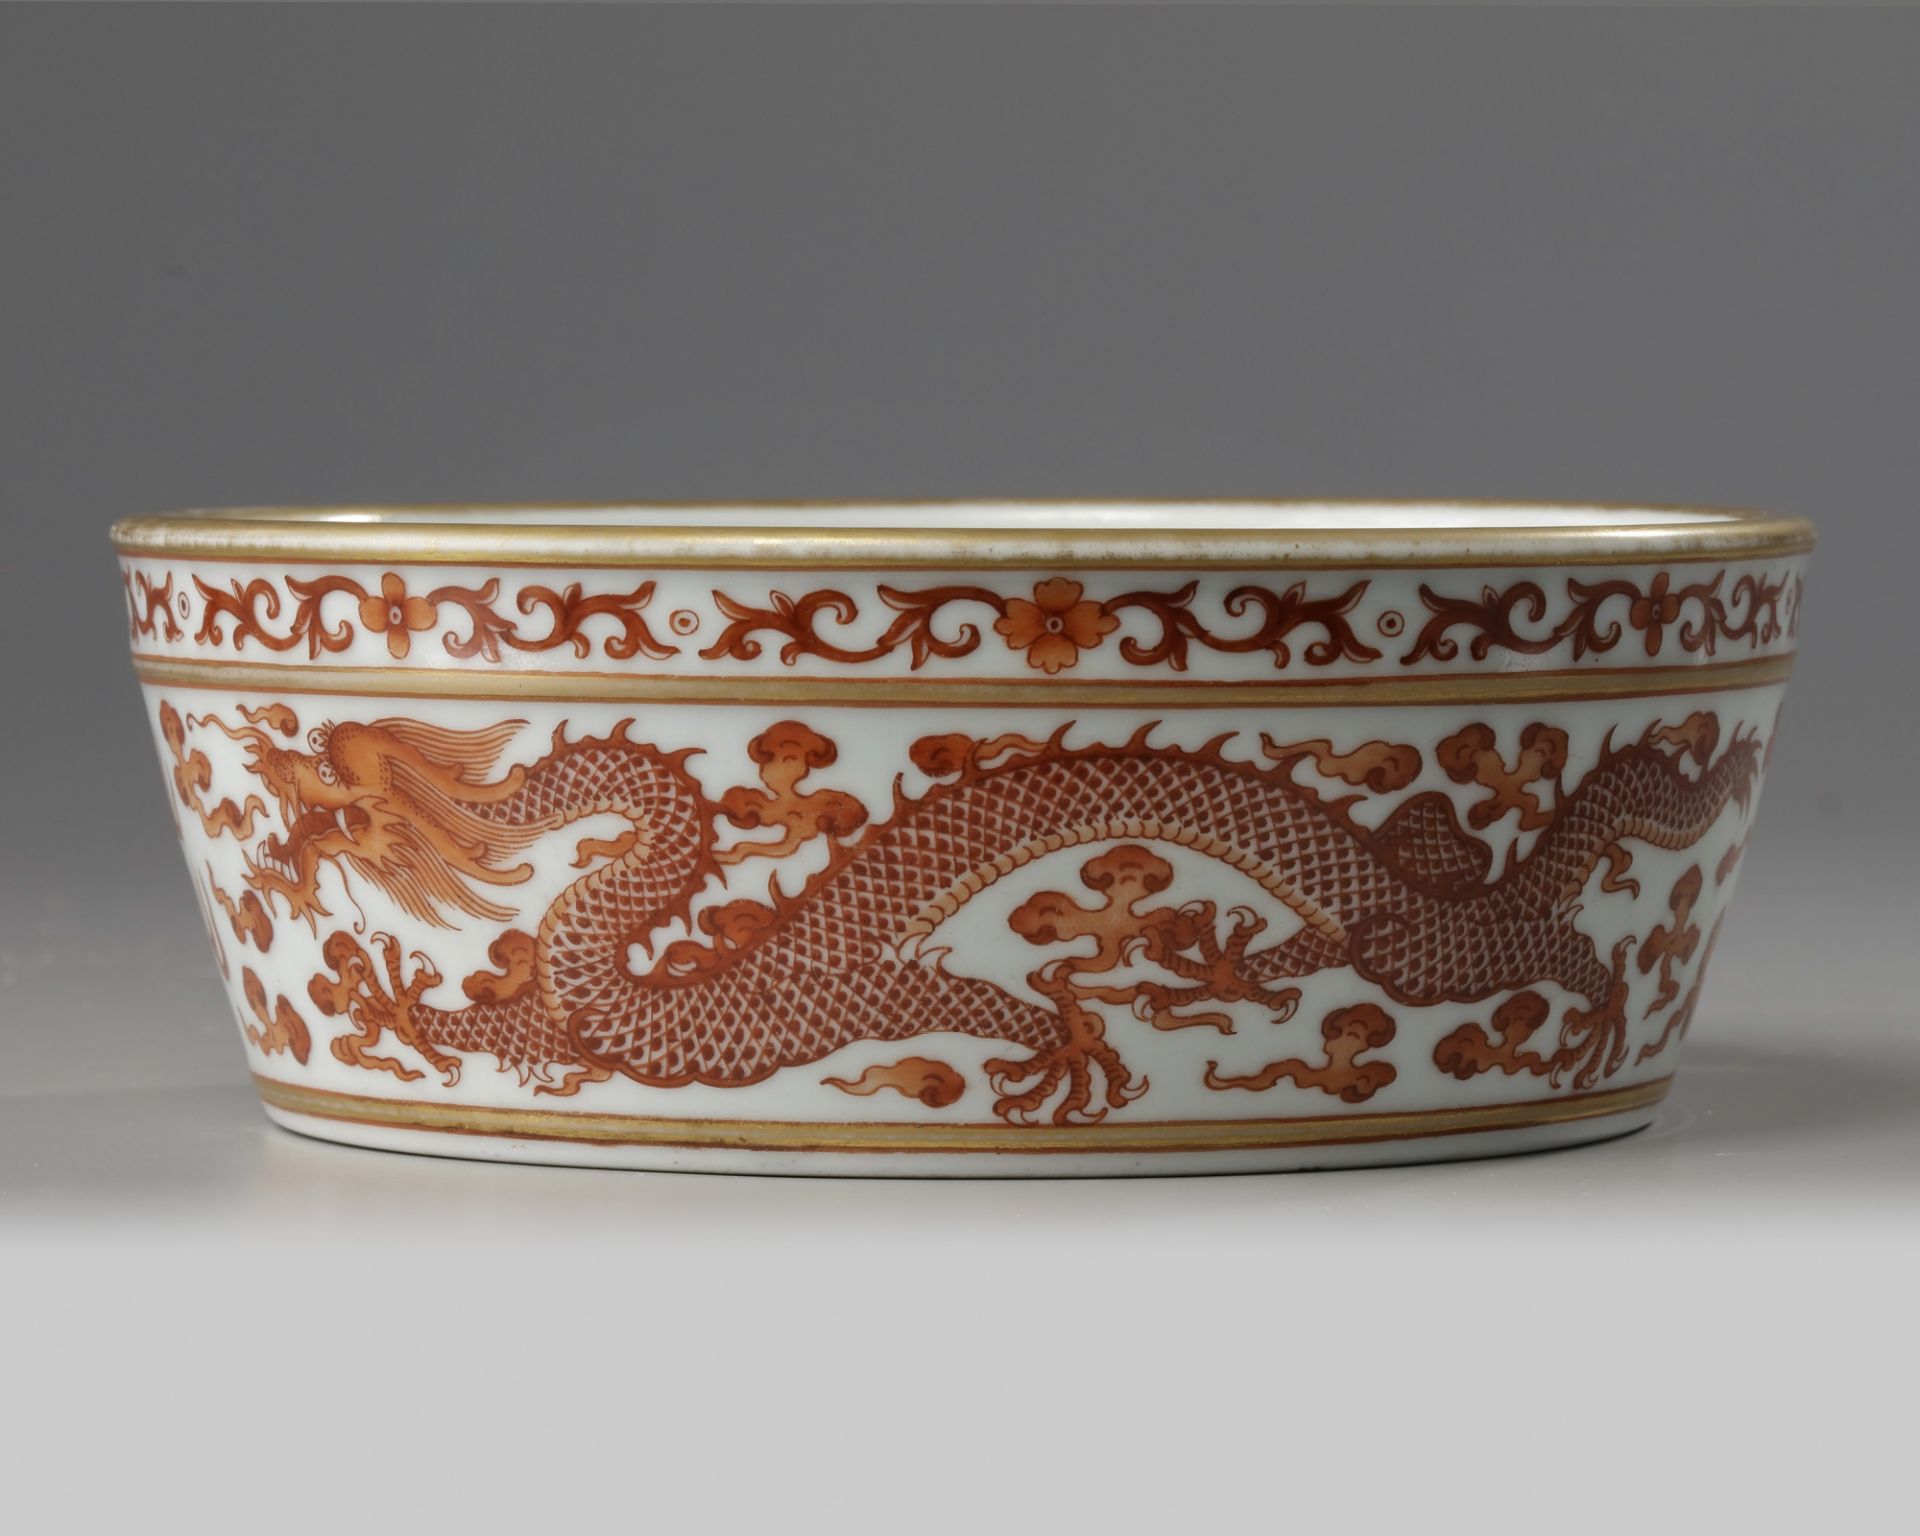 A Chinese iron-red-decorated 'dragon' bowl